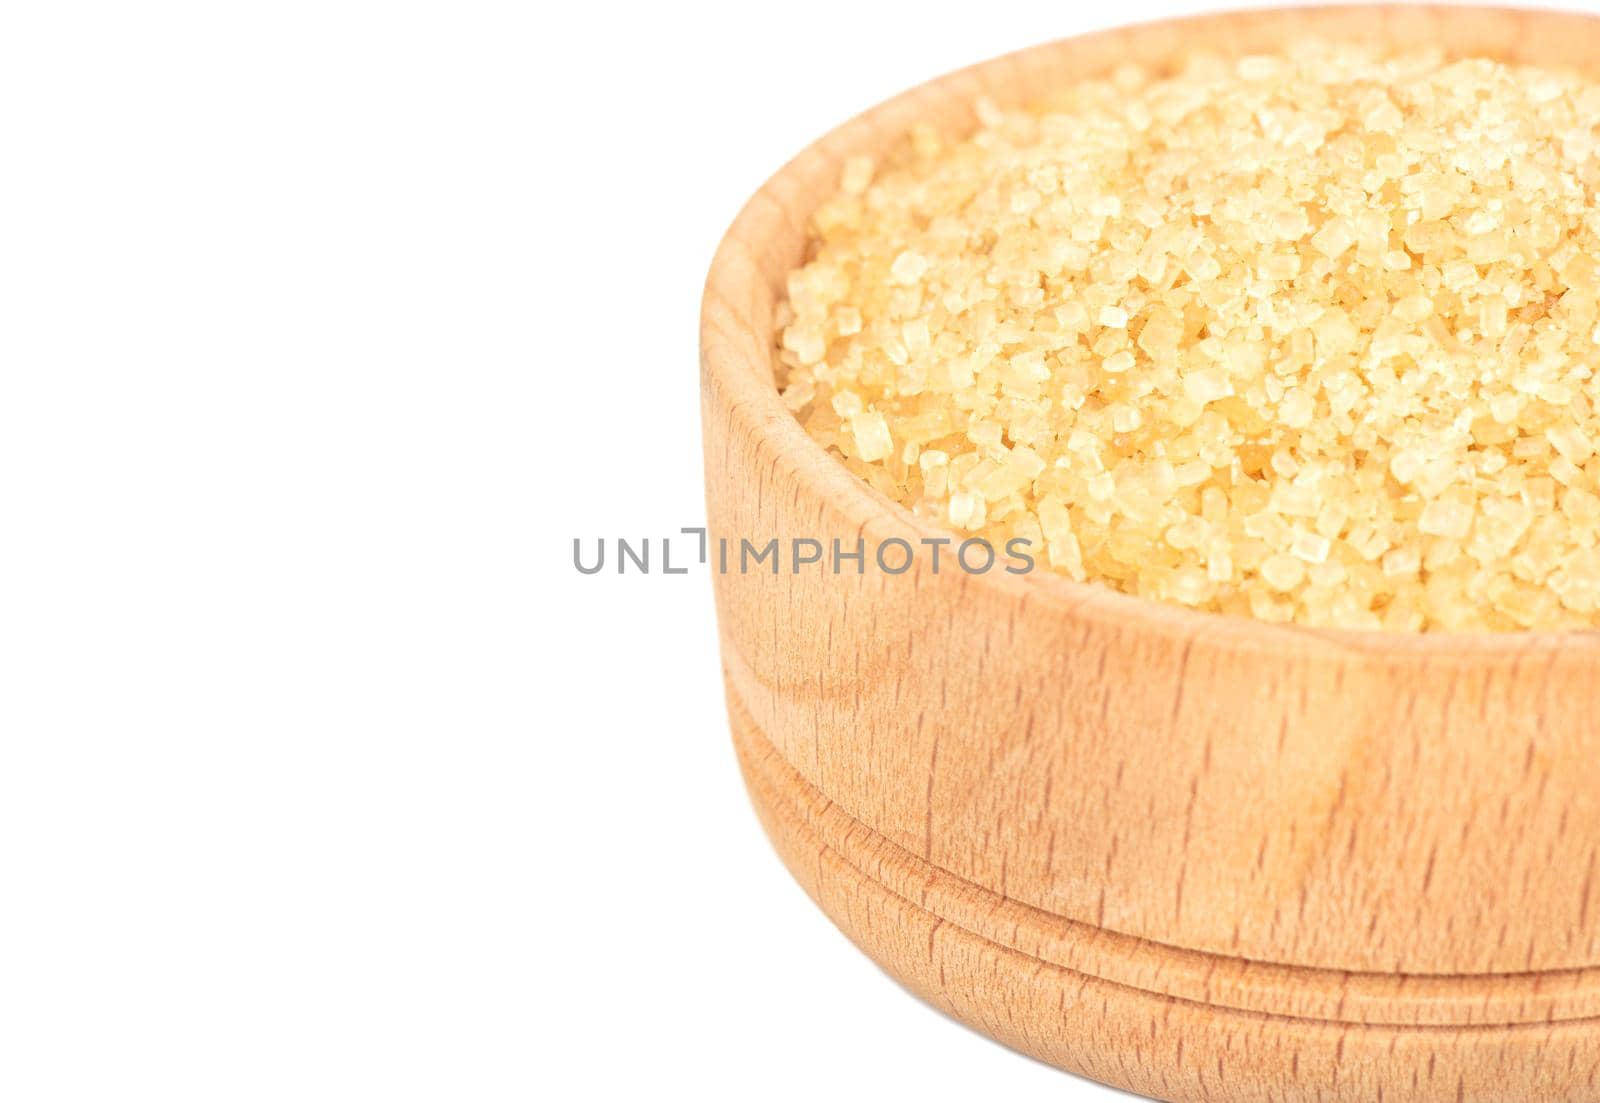 Part of a wooden bowl with brown sugar in close-up on a white background